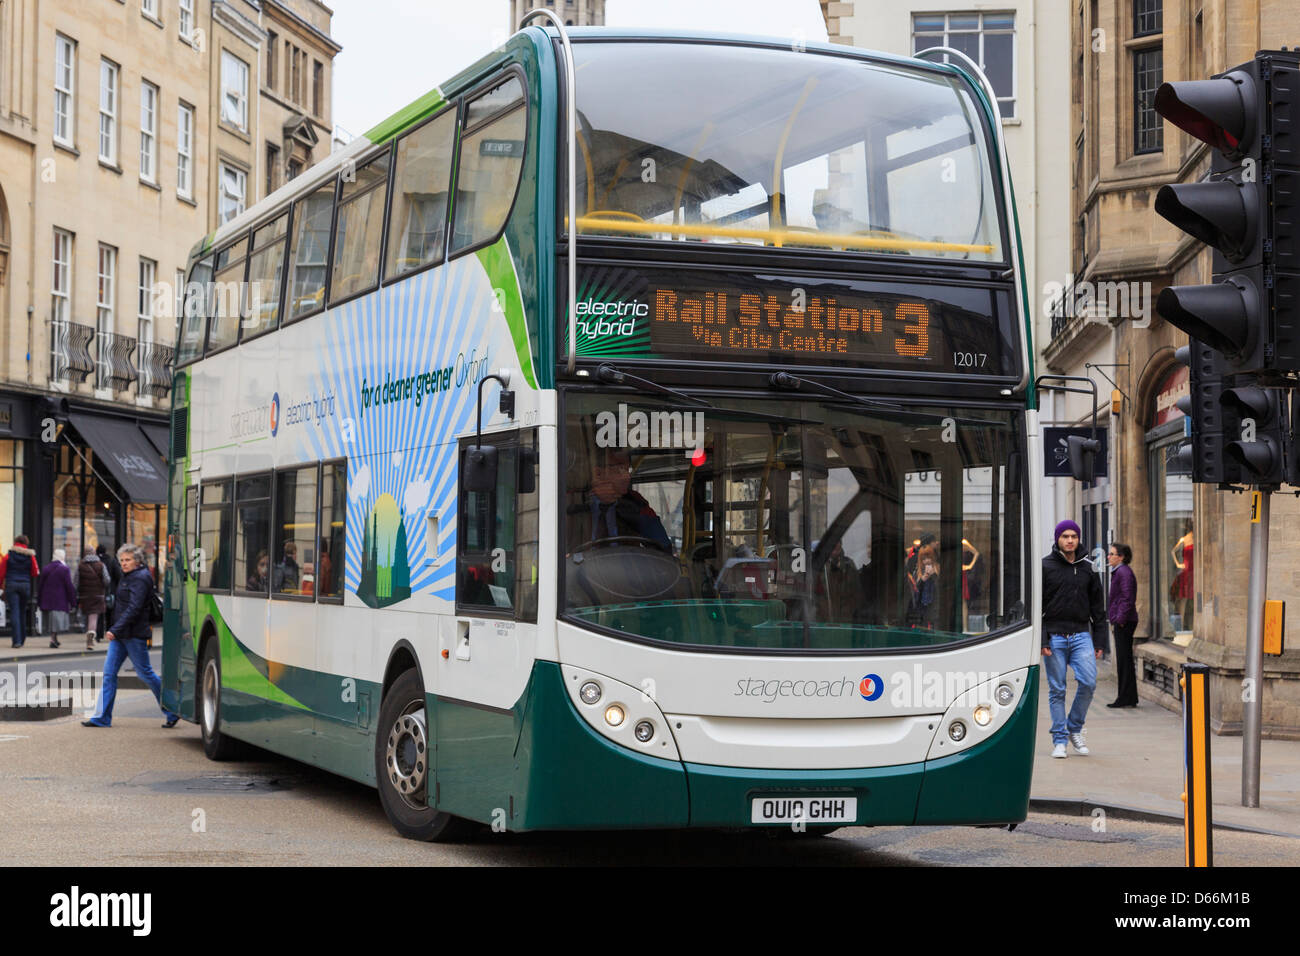 Electric hybrid double decker bus operated by Stagecoach in Oxford city centre, Oxfordshire, England, UK, Britain Stock Photo